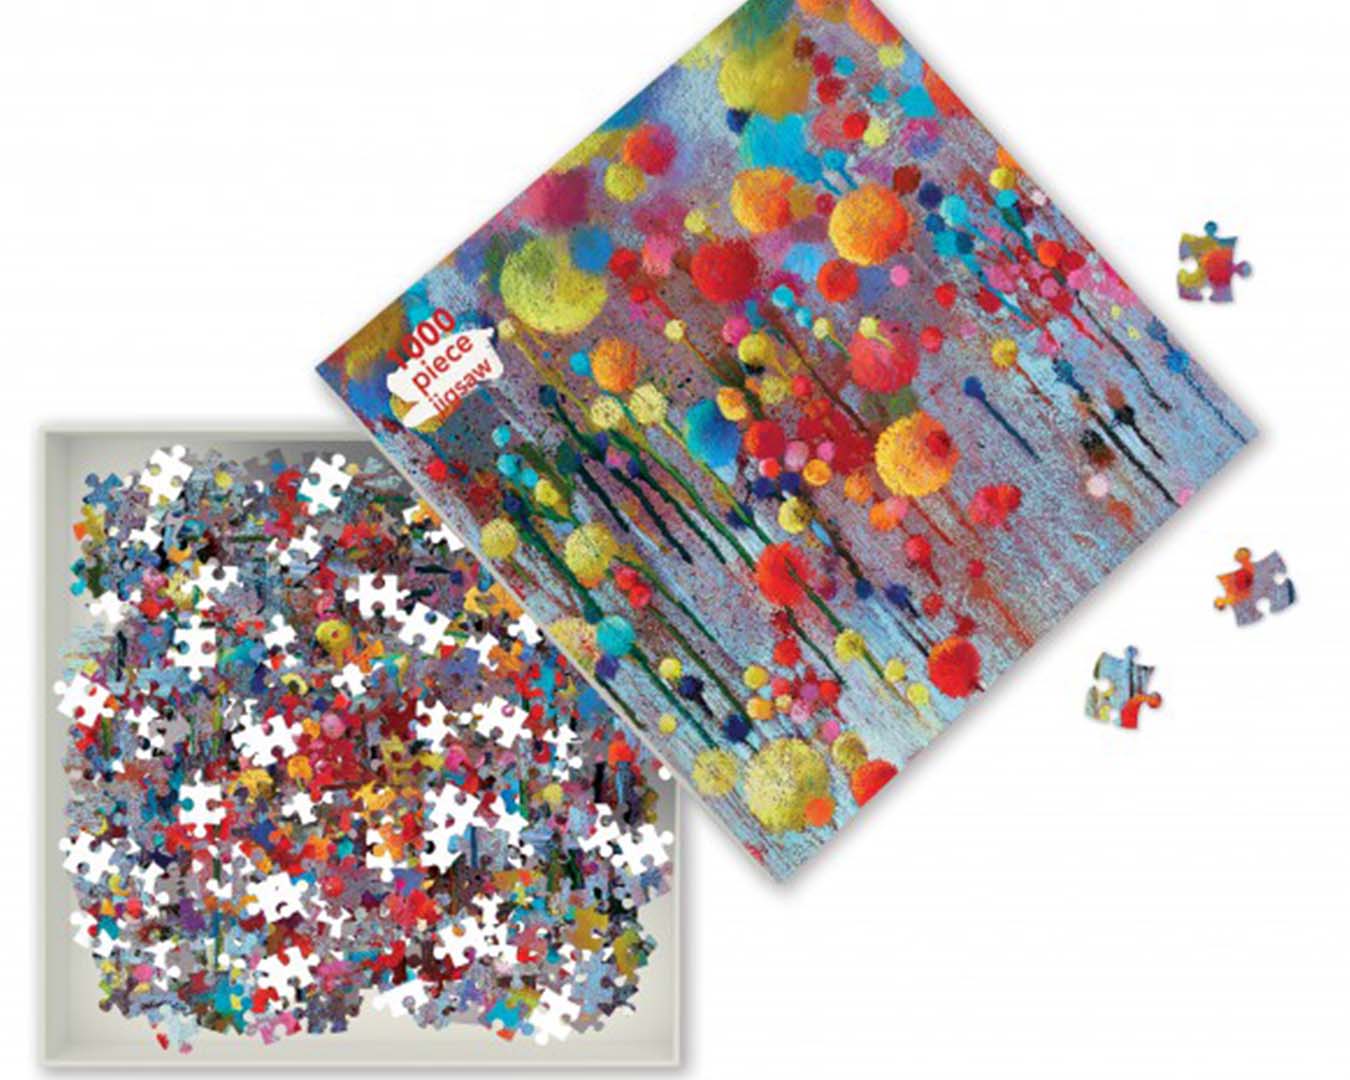 Open puzzle box showing a mixture of puzzle pieces and a colourful print on the box.